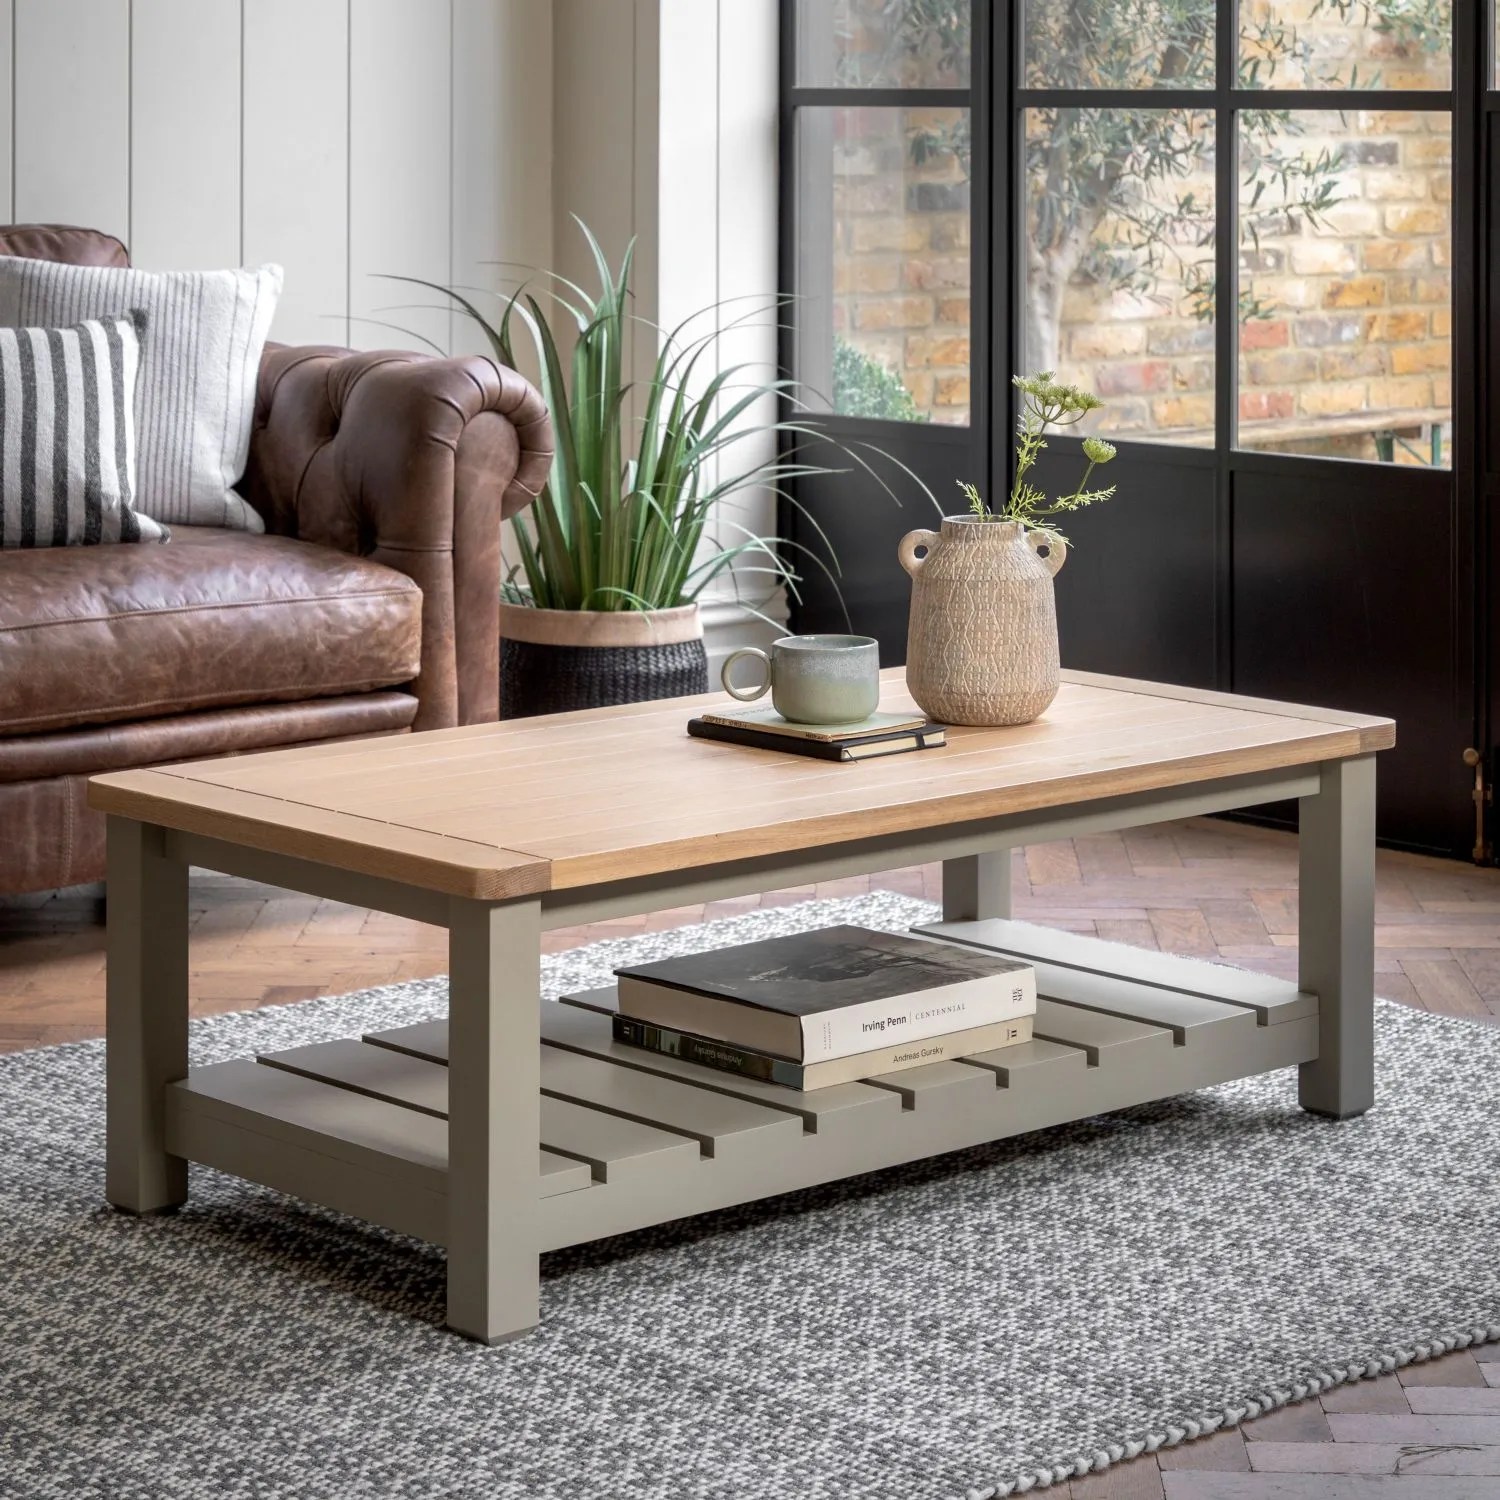 Light Grey Painted Oak Top Low Coffee Table with Shelf